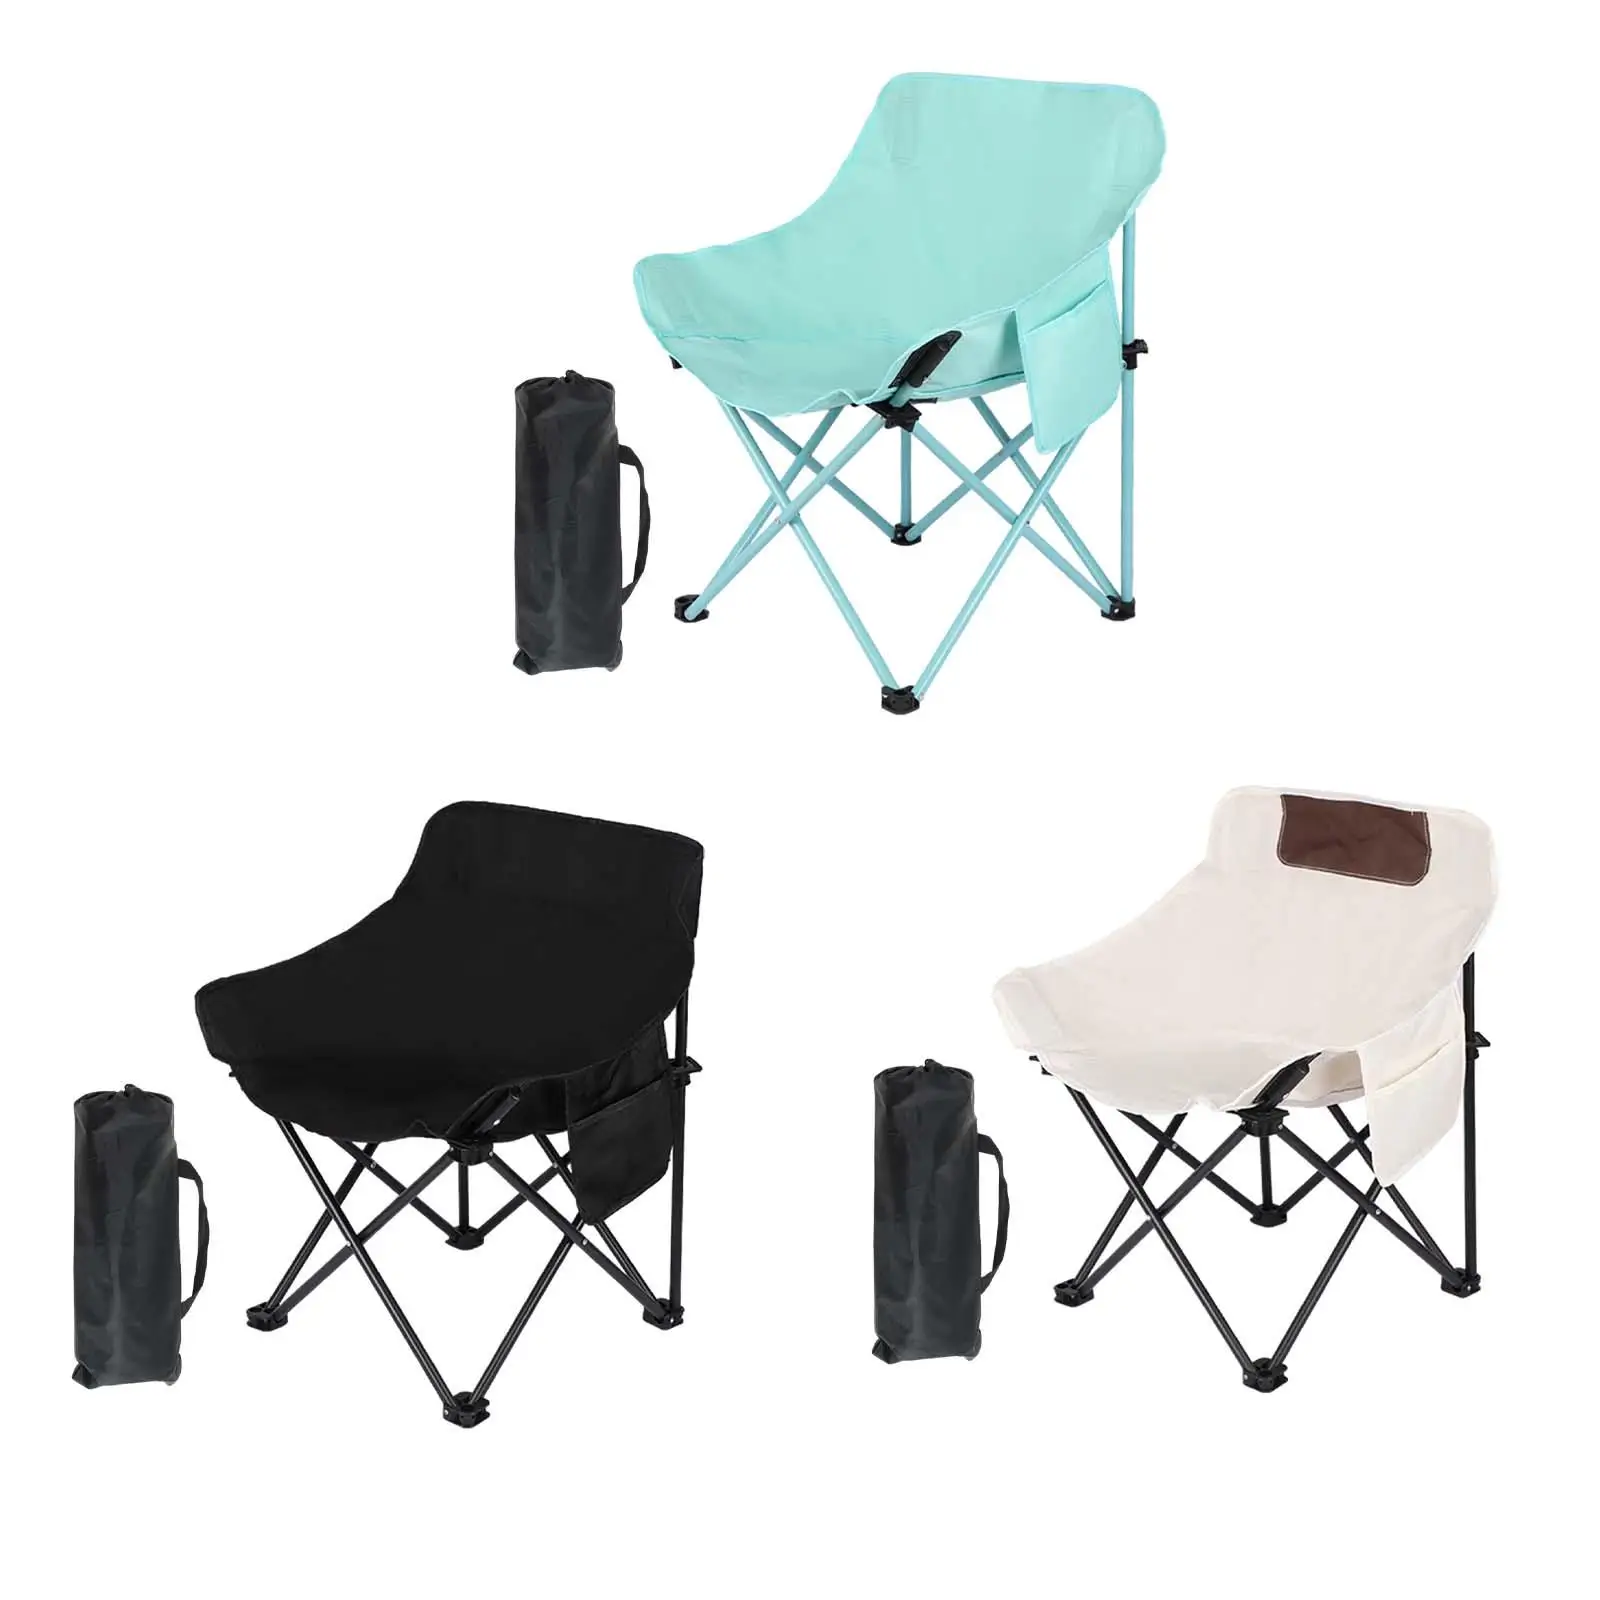 Folding Camping Chair Portable Beach Chair for Sporting Events Backyard